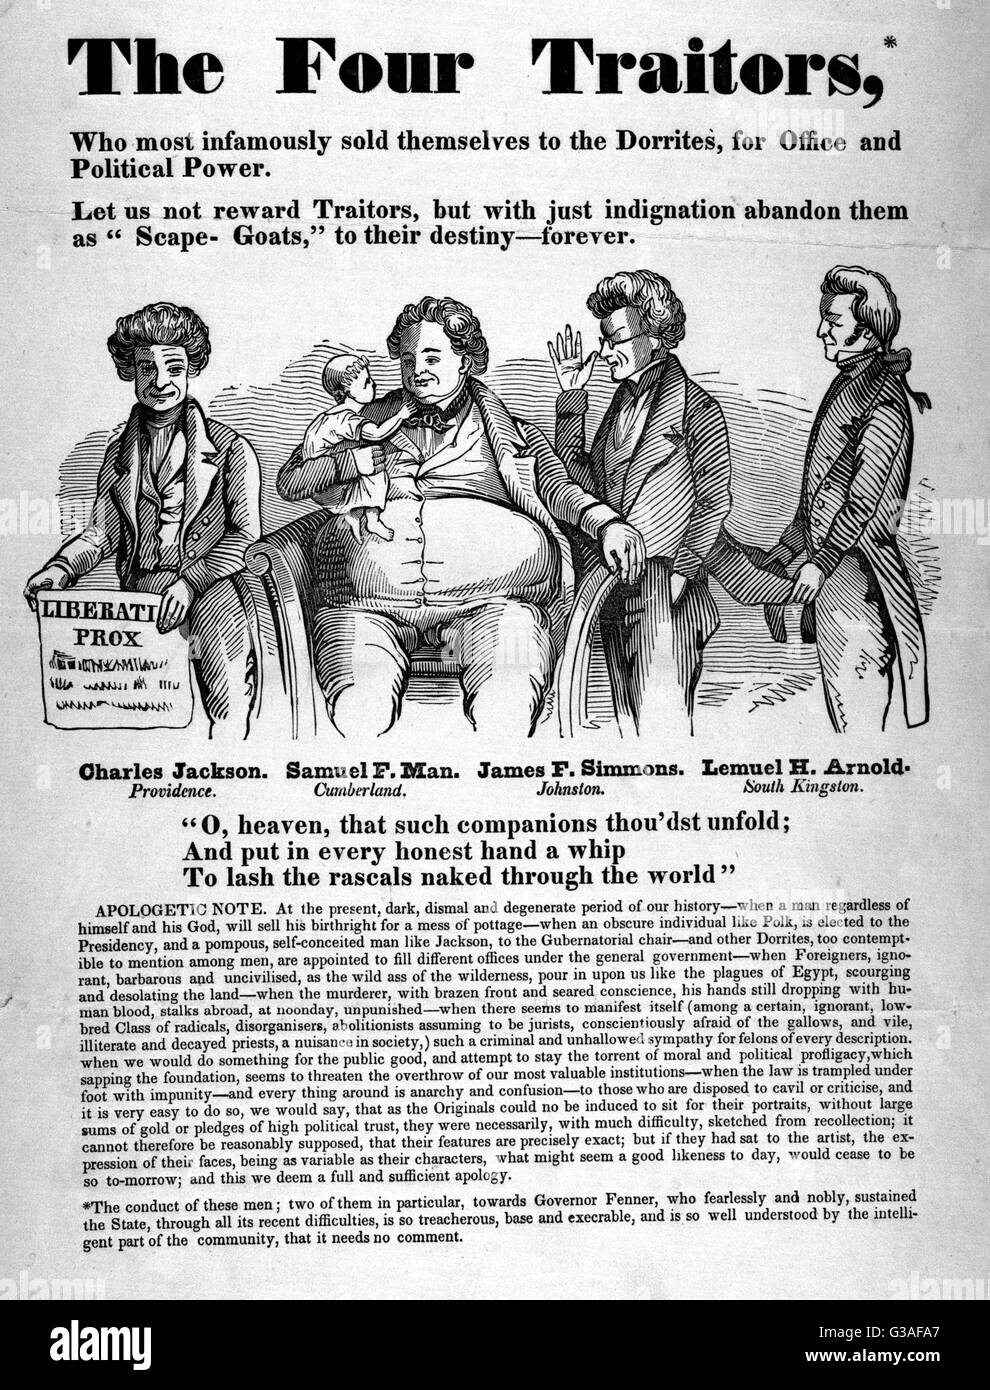 The four traitors, who most infamously sold themselves to the Dorrites for office and political power. An illustrated broadside reviling four Rhode Island Whigs who broke party ranks to support a popular movement to free imprisoned radical Thomas Wilson D Stock Photo